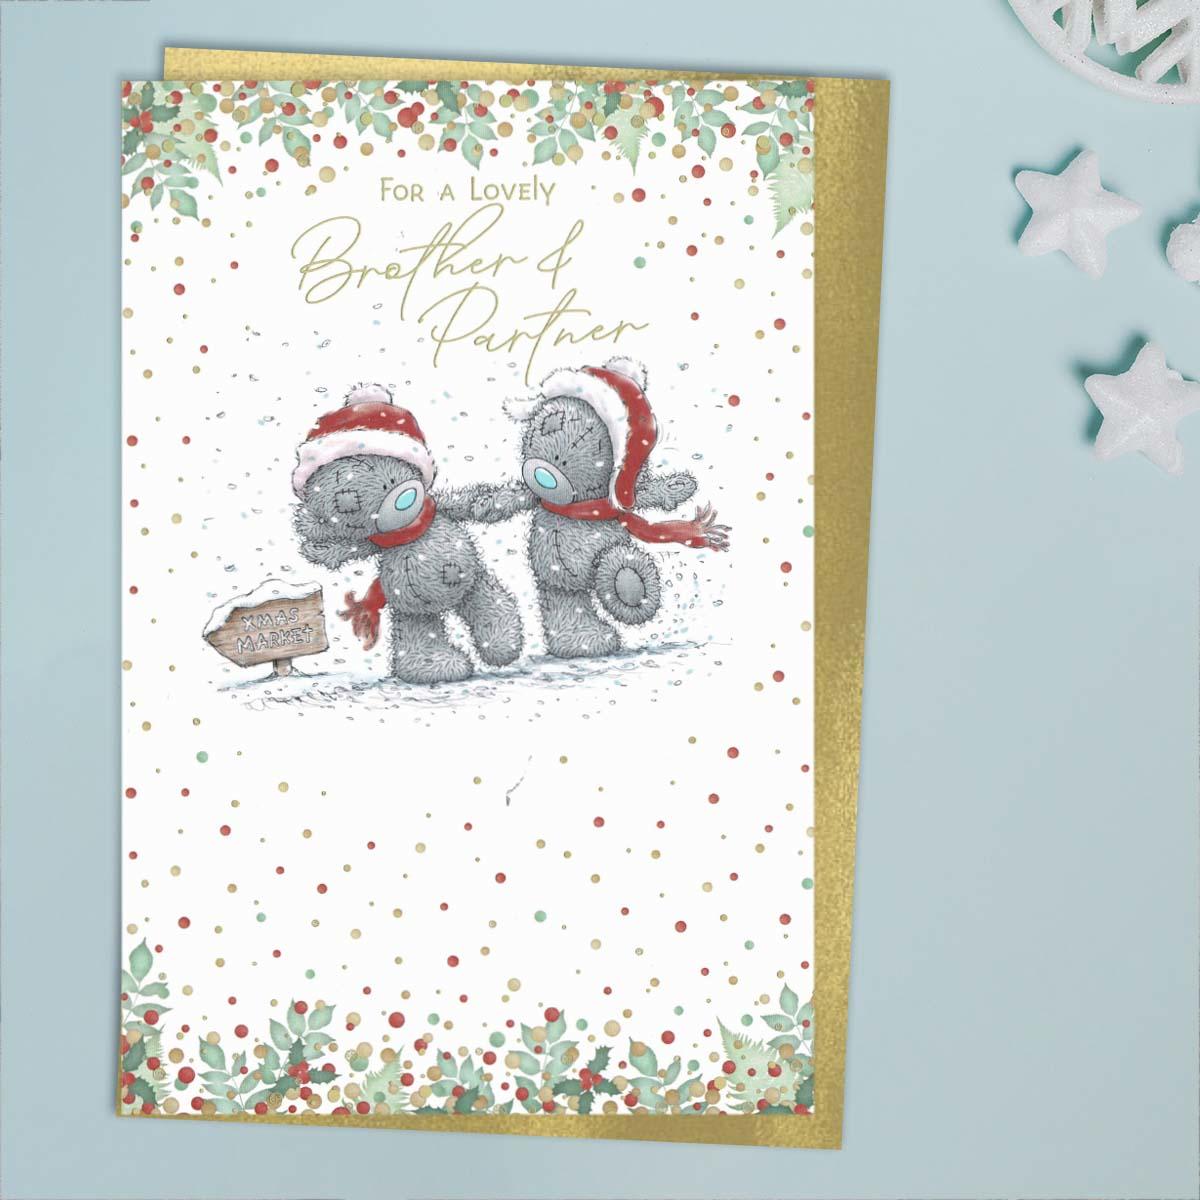 Lovely Brother And Partner Snow Tatty Teddy Christmas Card Front Image